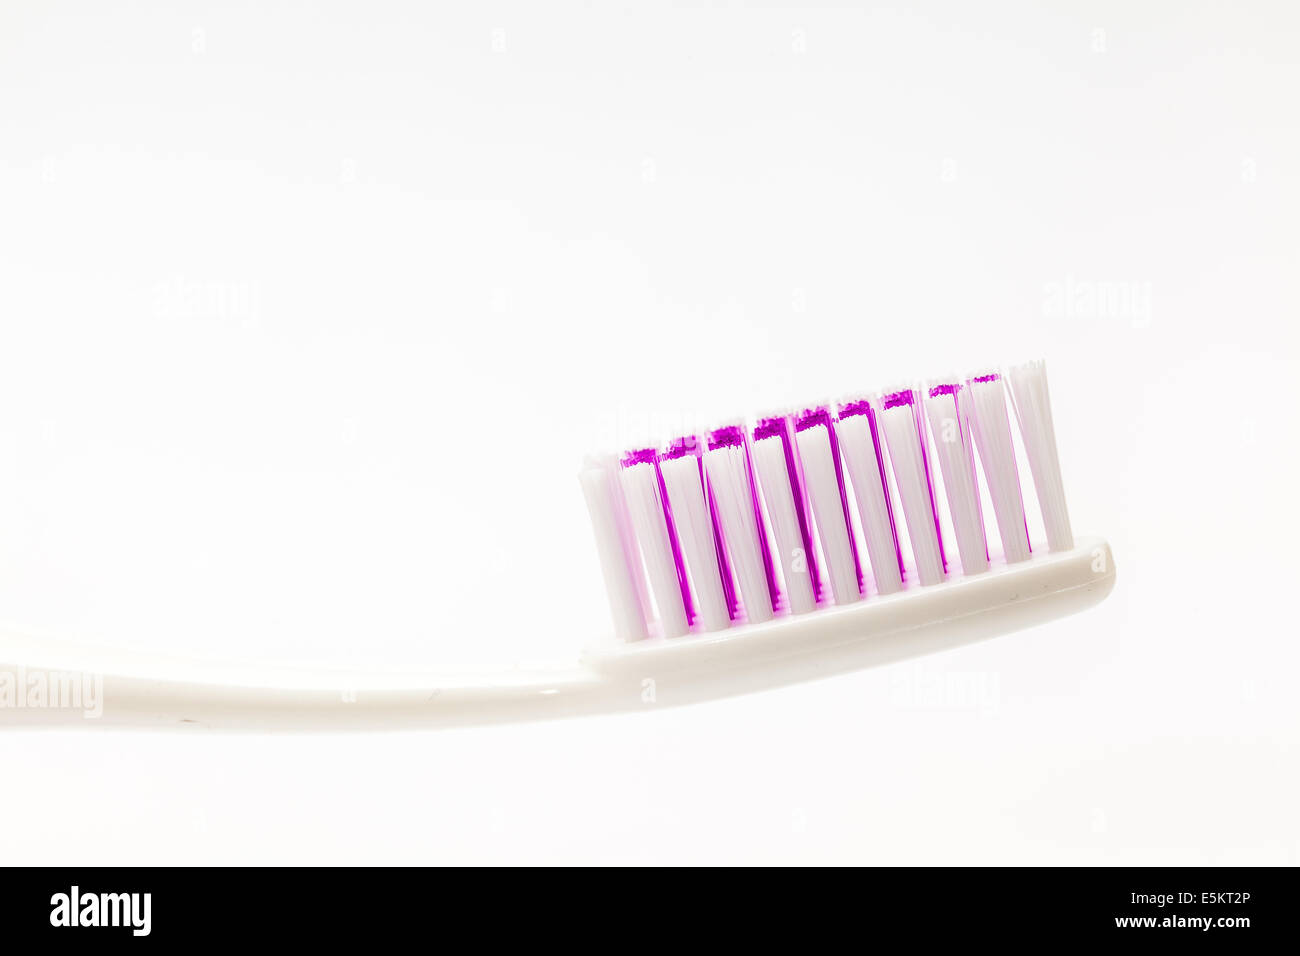 different colored plastic toothbrushes with white background Stock Photo